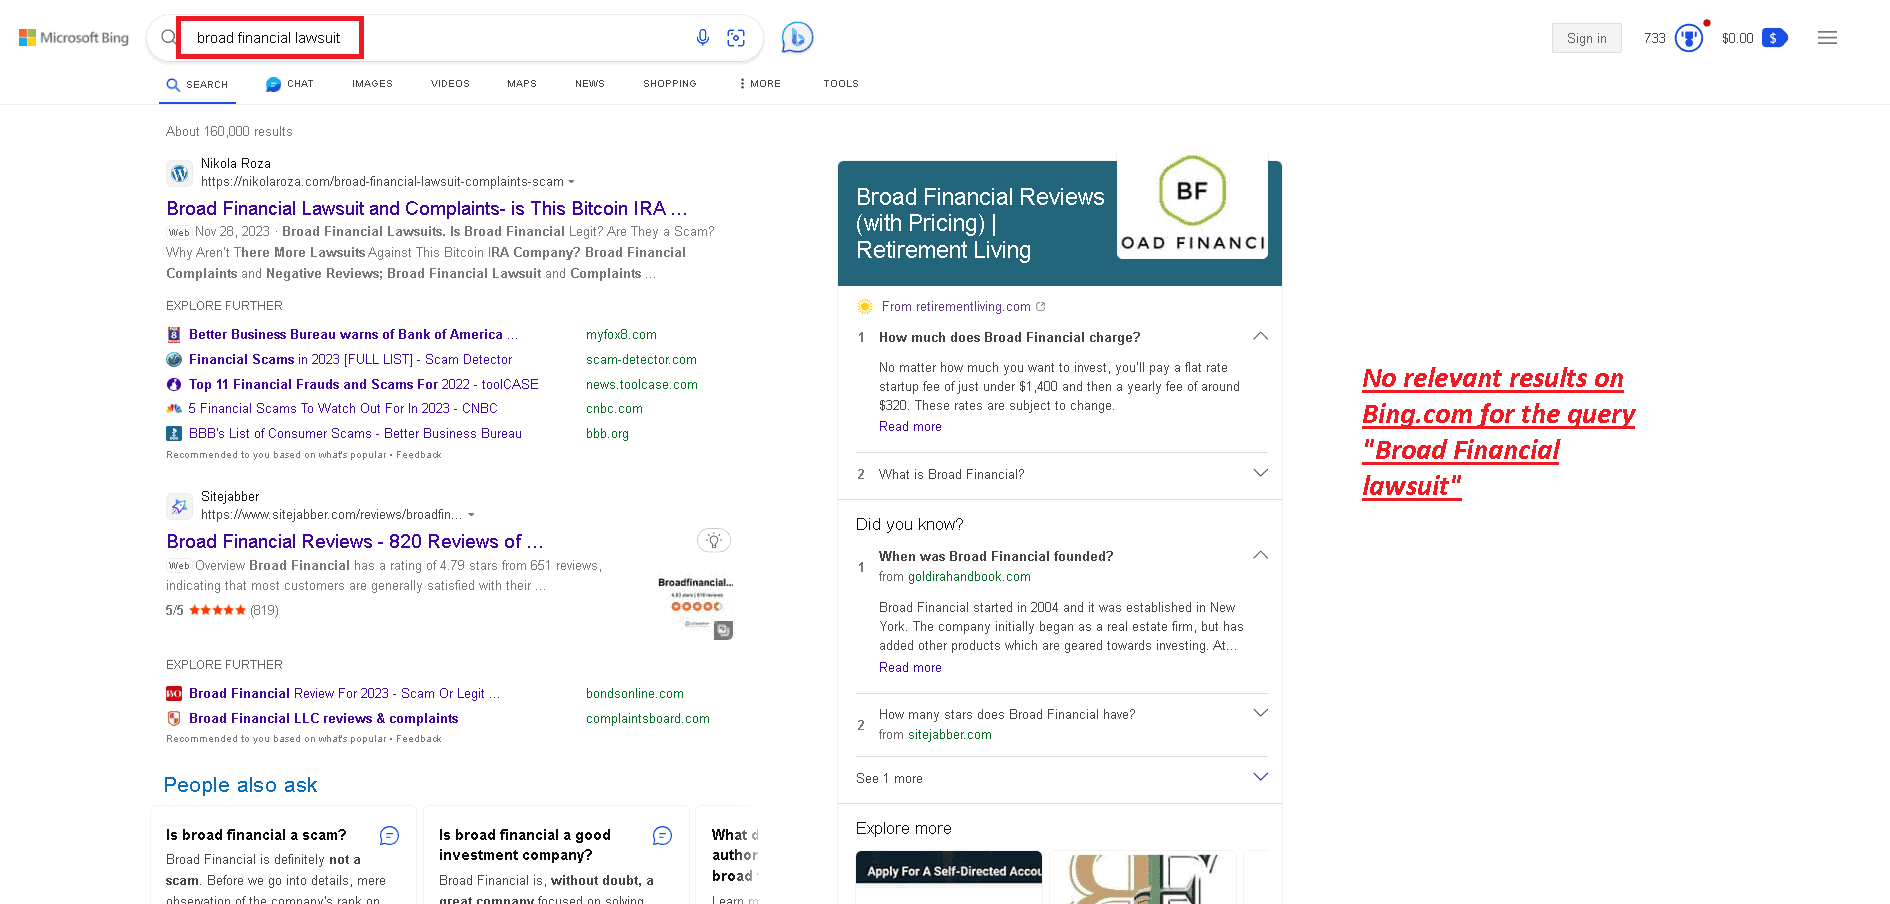 Broad Financial lawsuit- no relevant results on Bing.com